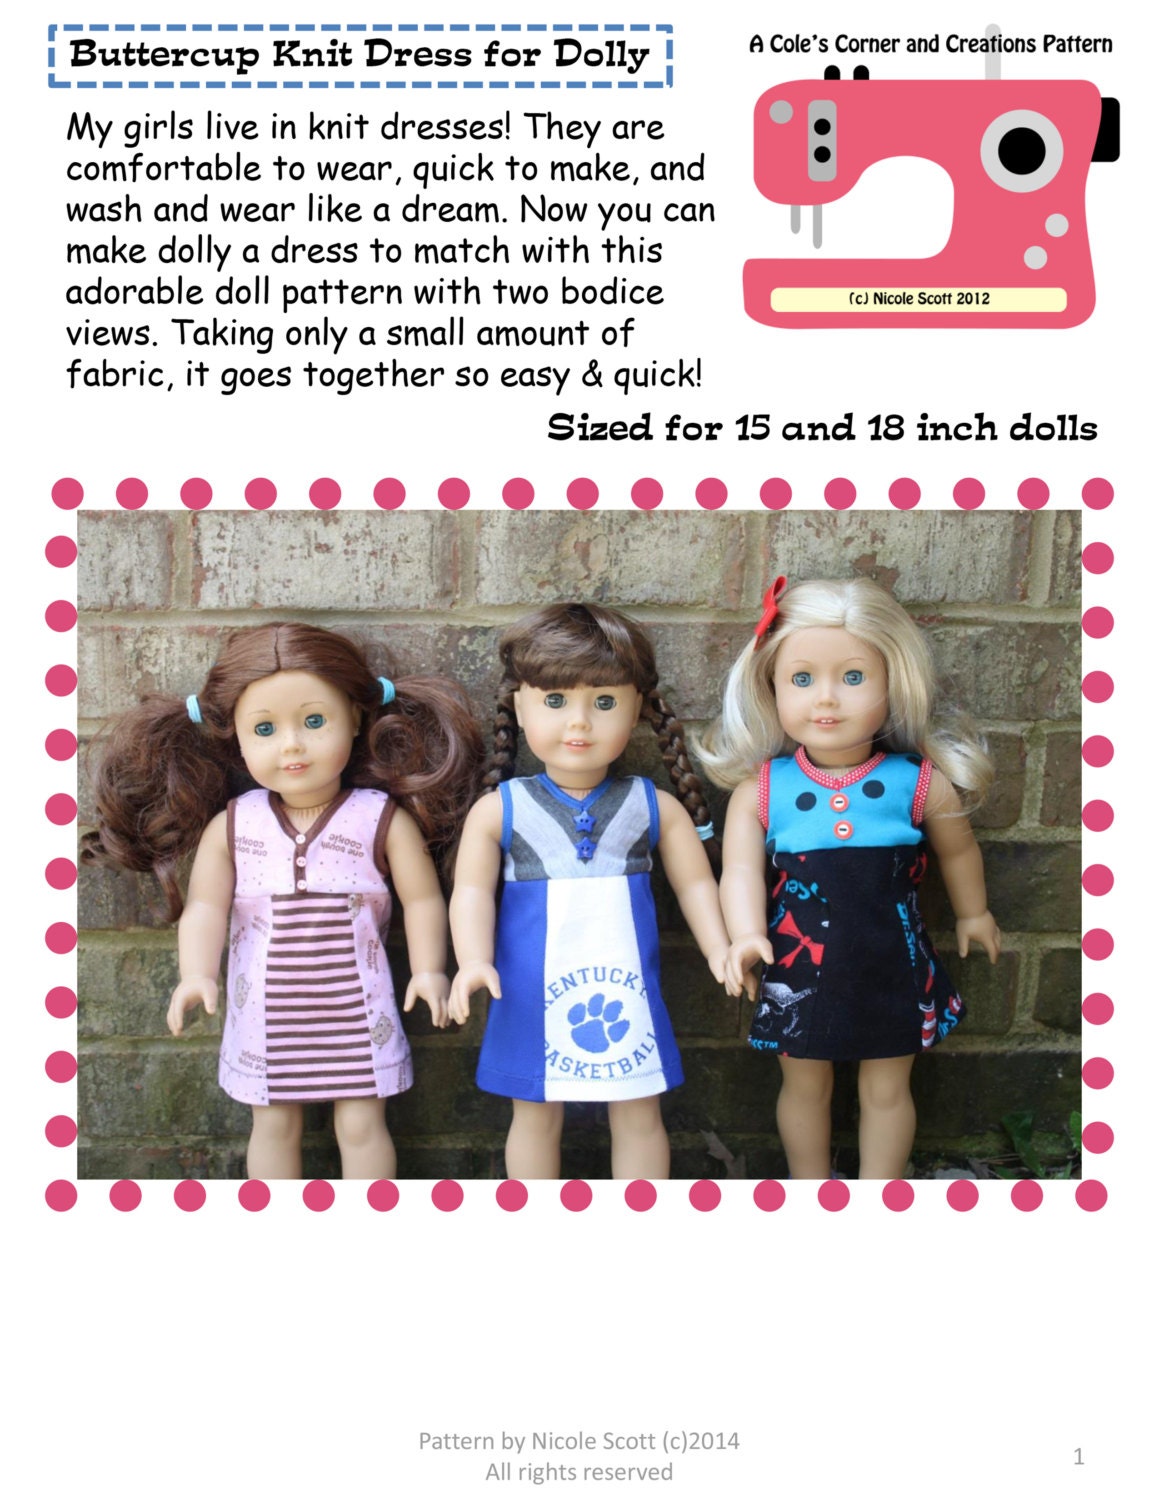 Dolly Adelyn. PDF downloadable sewing pattern for dolls American Girl  Wellie Wisher Bitty Baby 14, 15 & 18 inch.